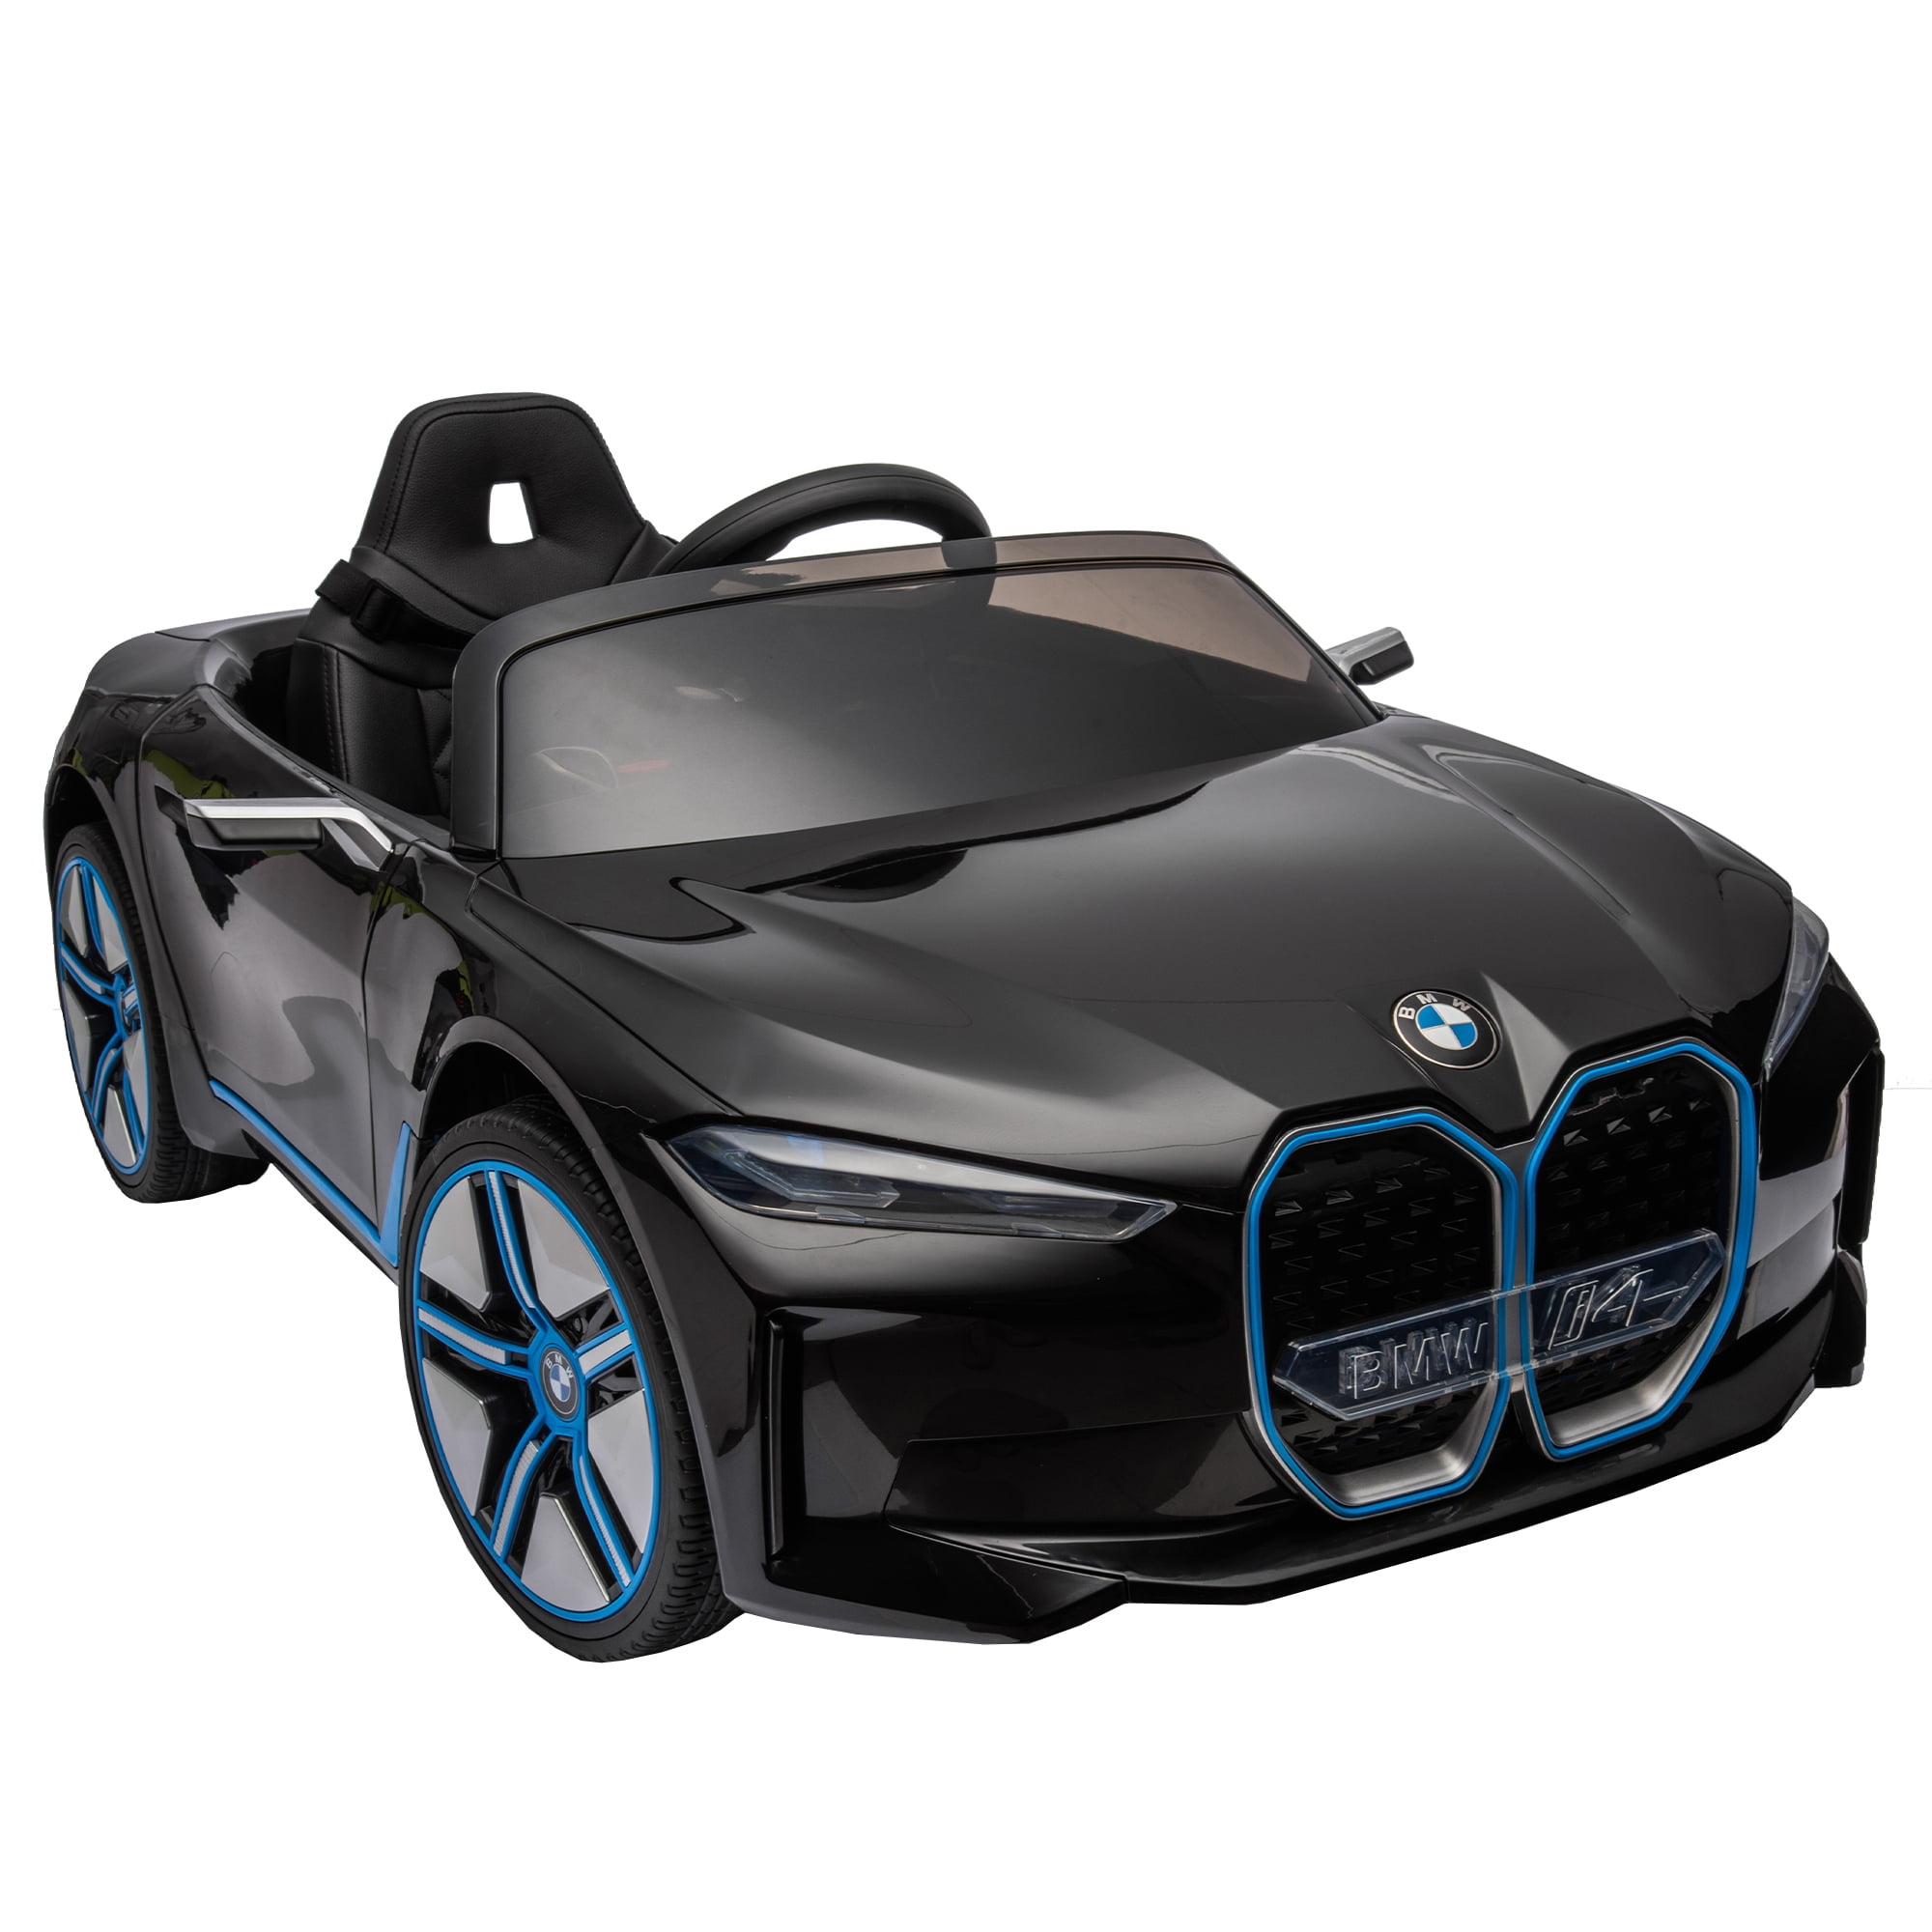 Licensed BMW I4 Powered Ride on Cars, 12 Volt Ride on Toy with